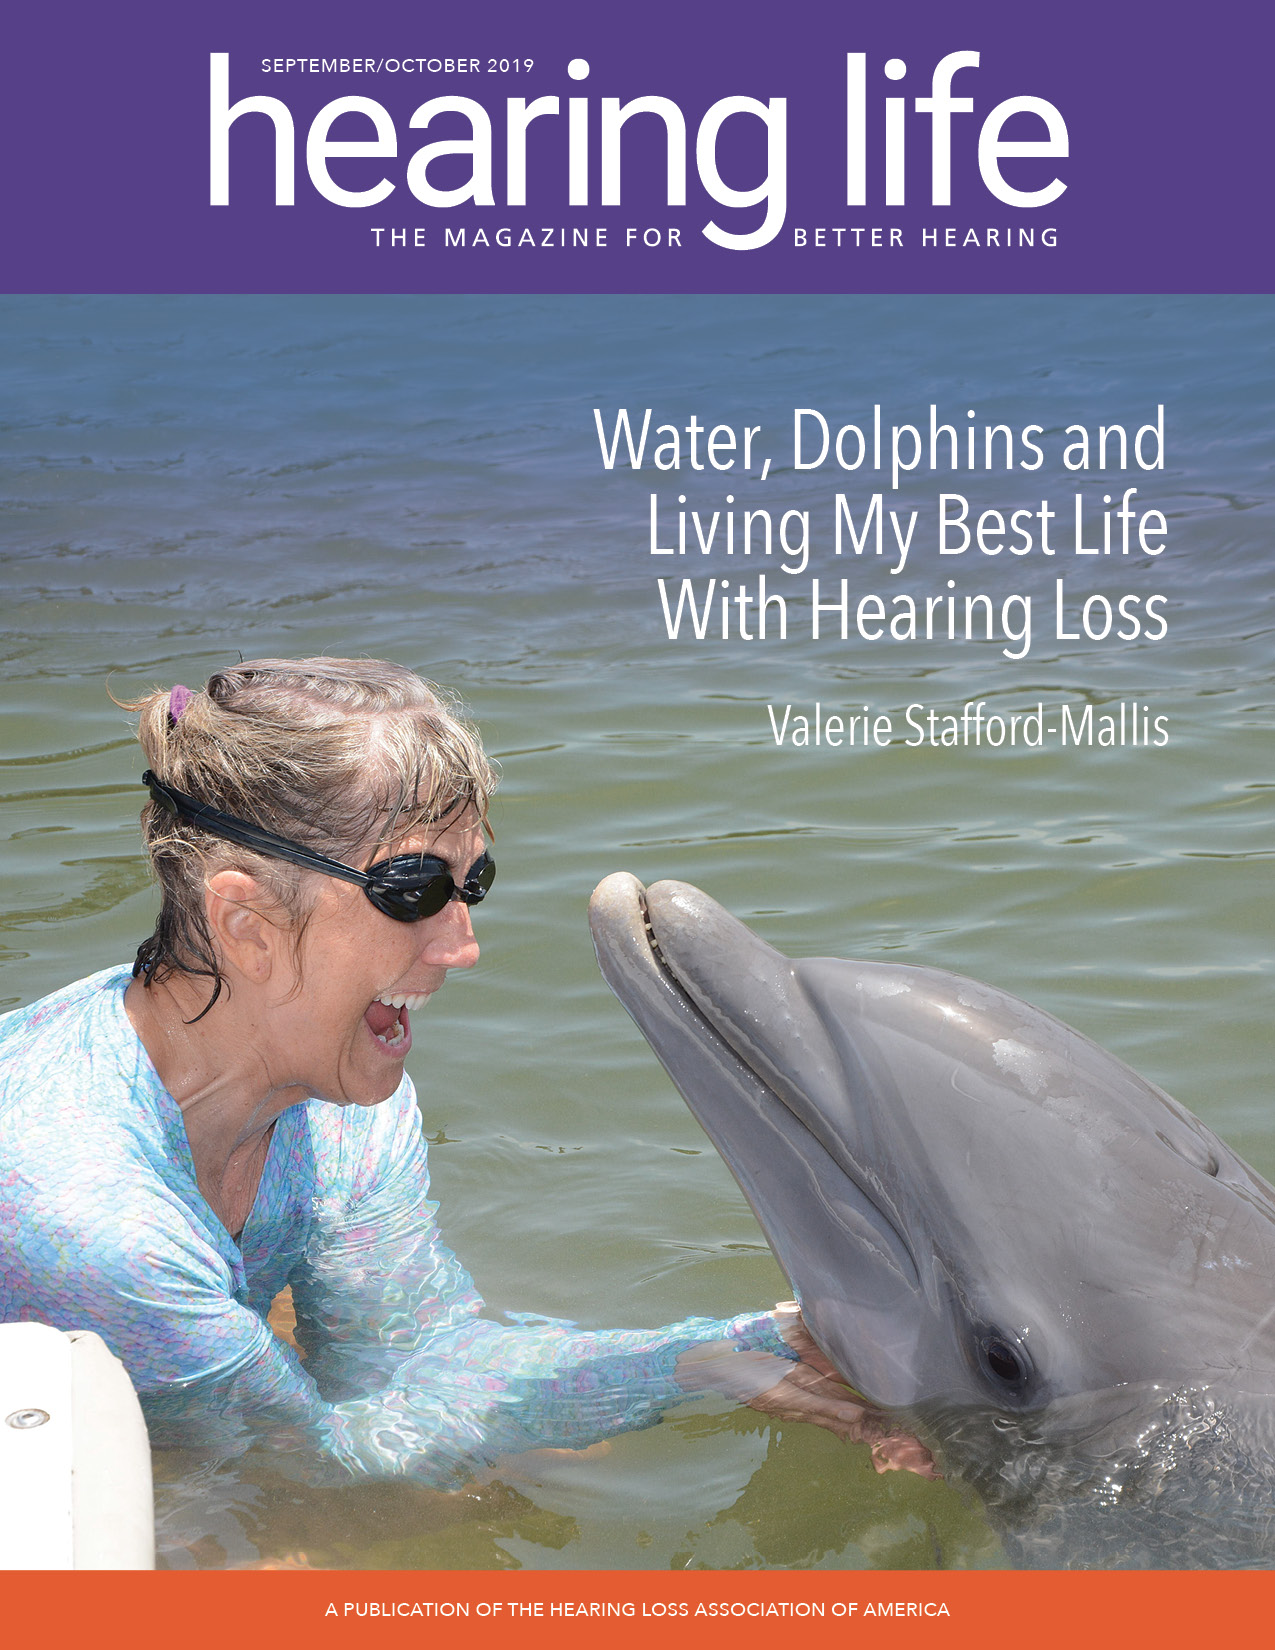 HLAA Hearing Life 2019 September/October Cover with Valerie Stafford-Mallis in the water with a dolphin